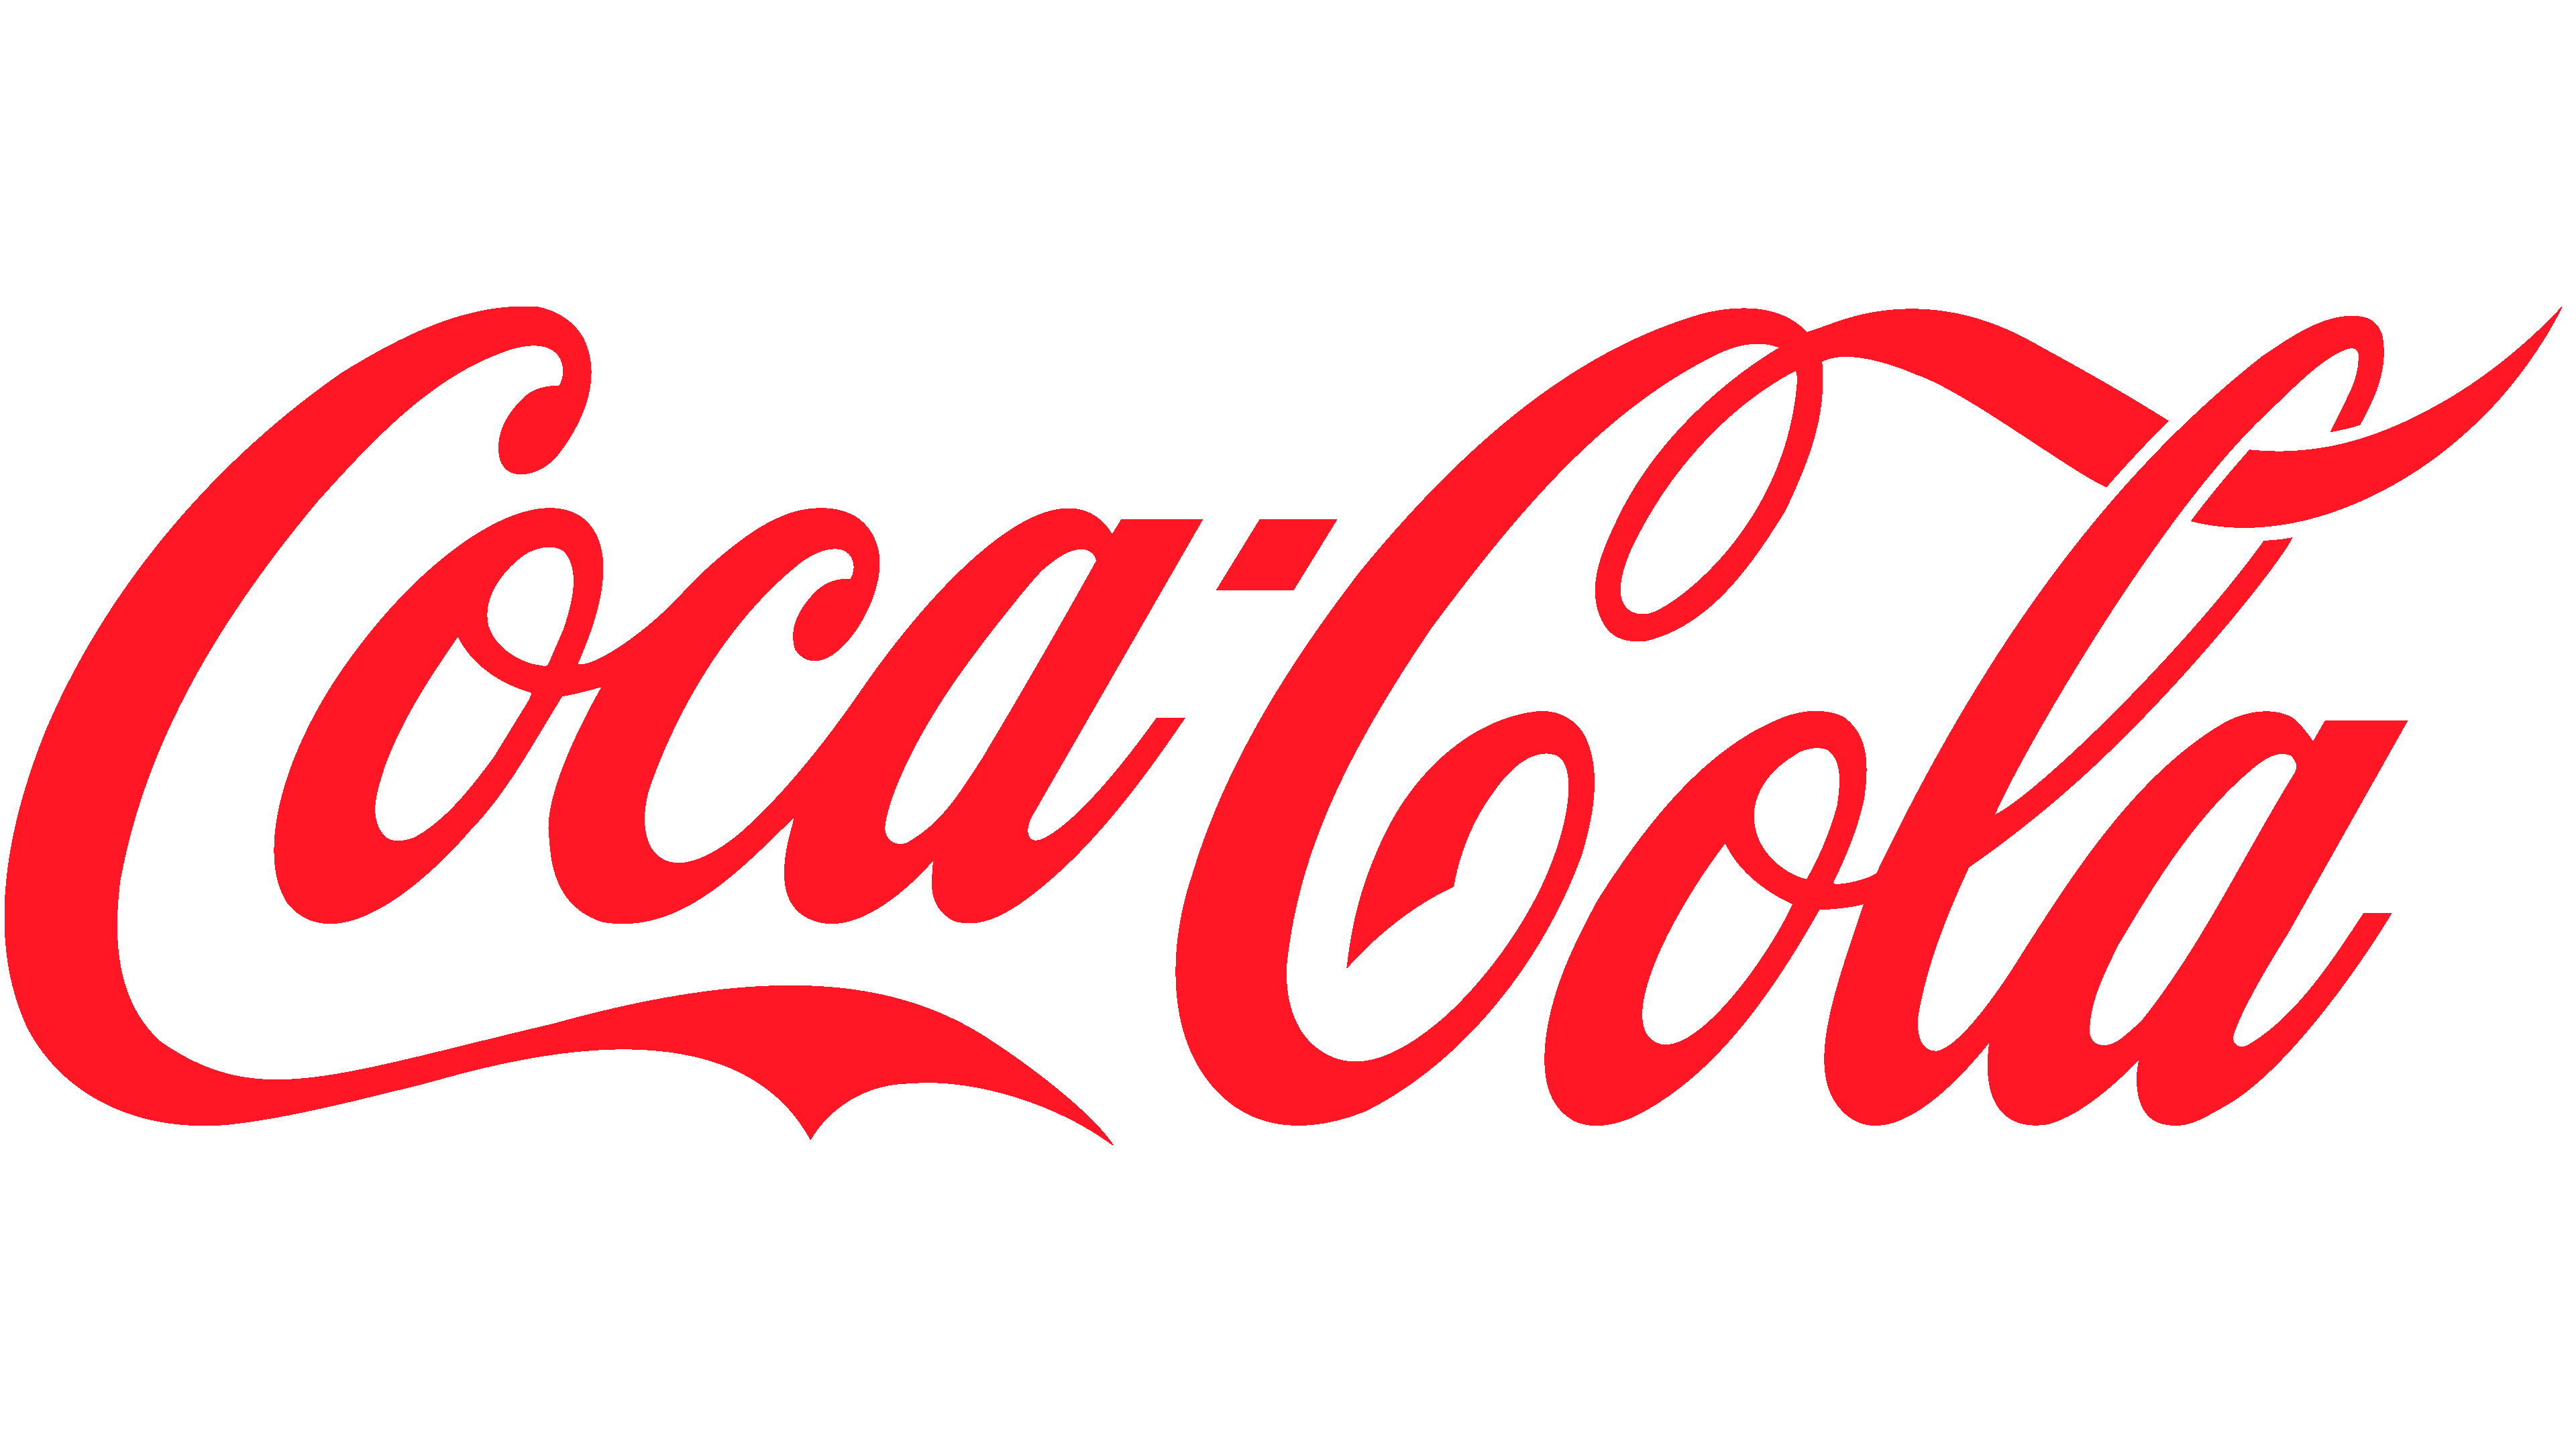 Coca Cola Logo, symbol, meaning, history, PNG, in red text white background